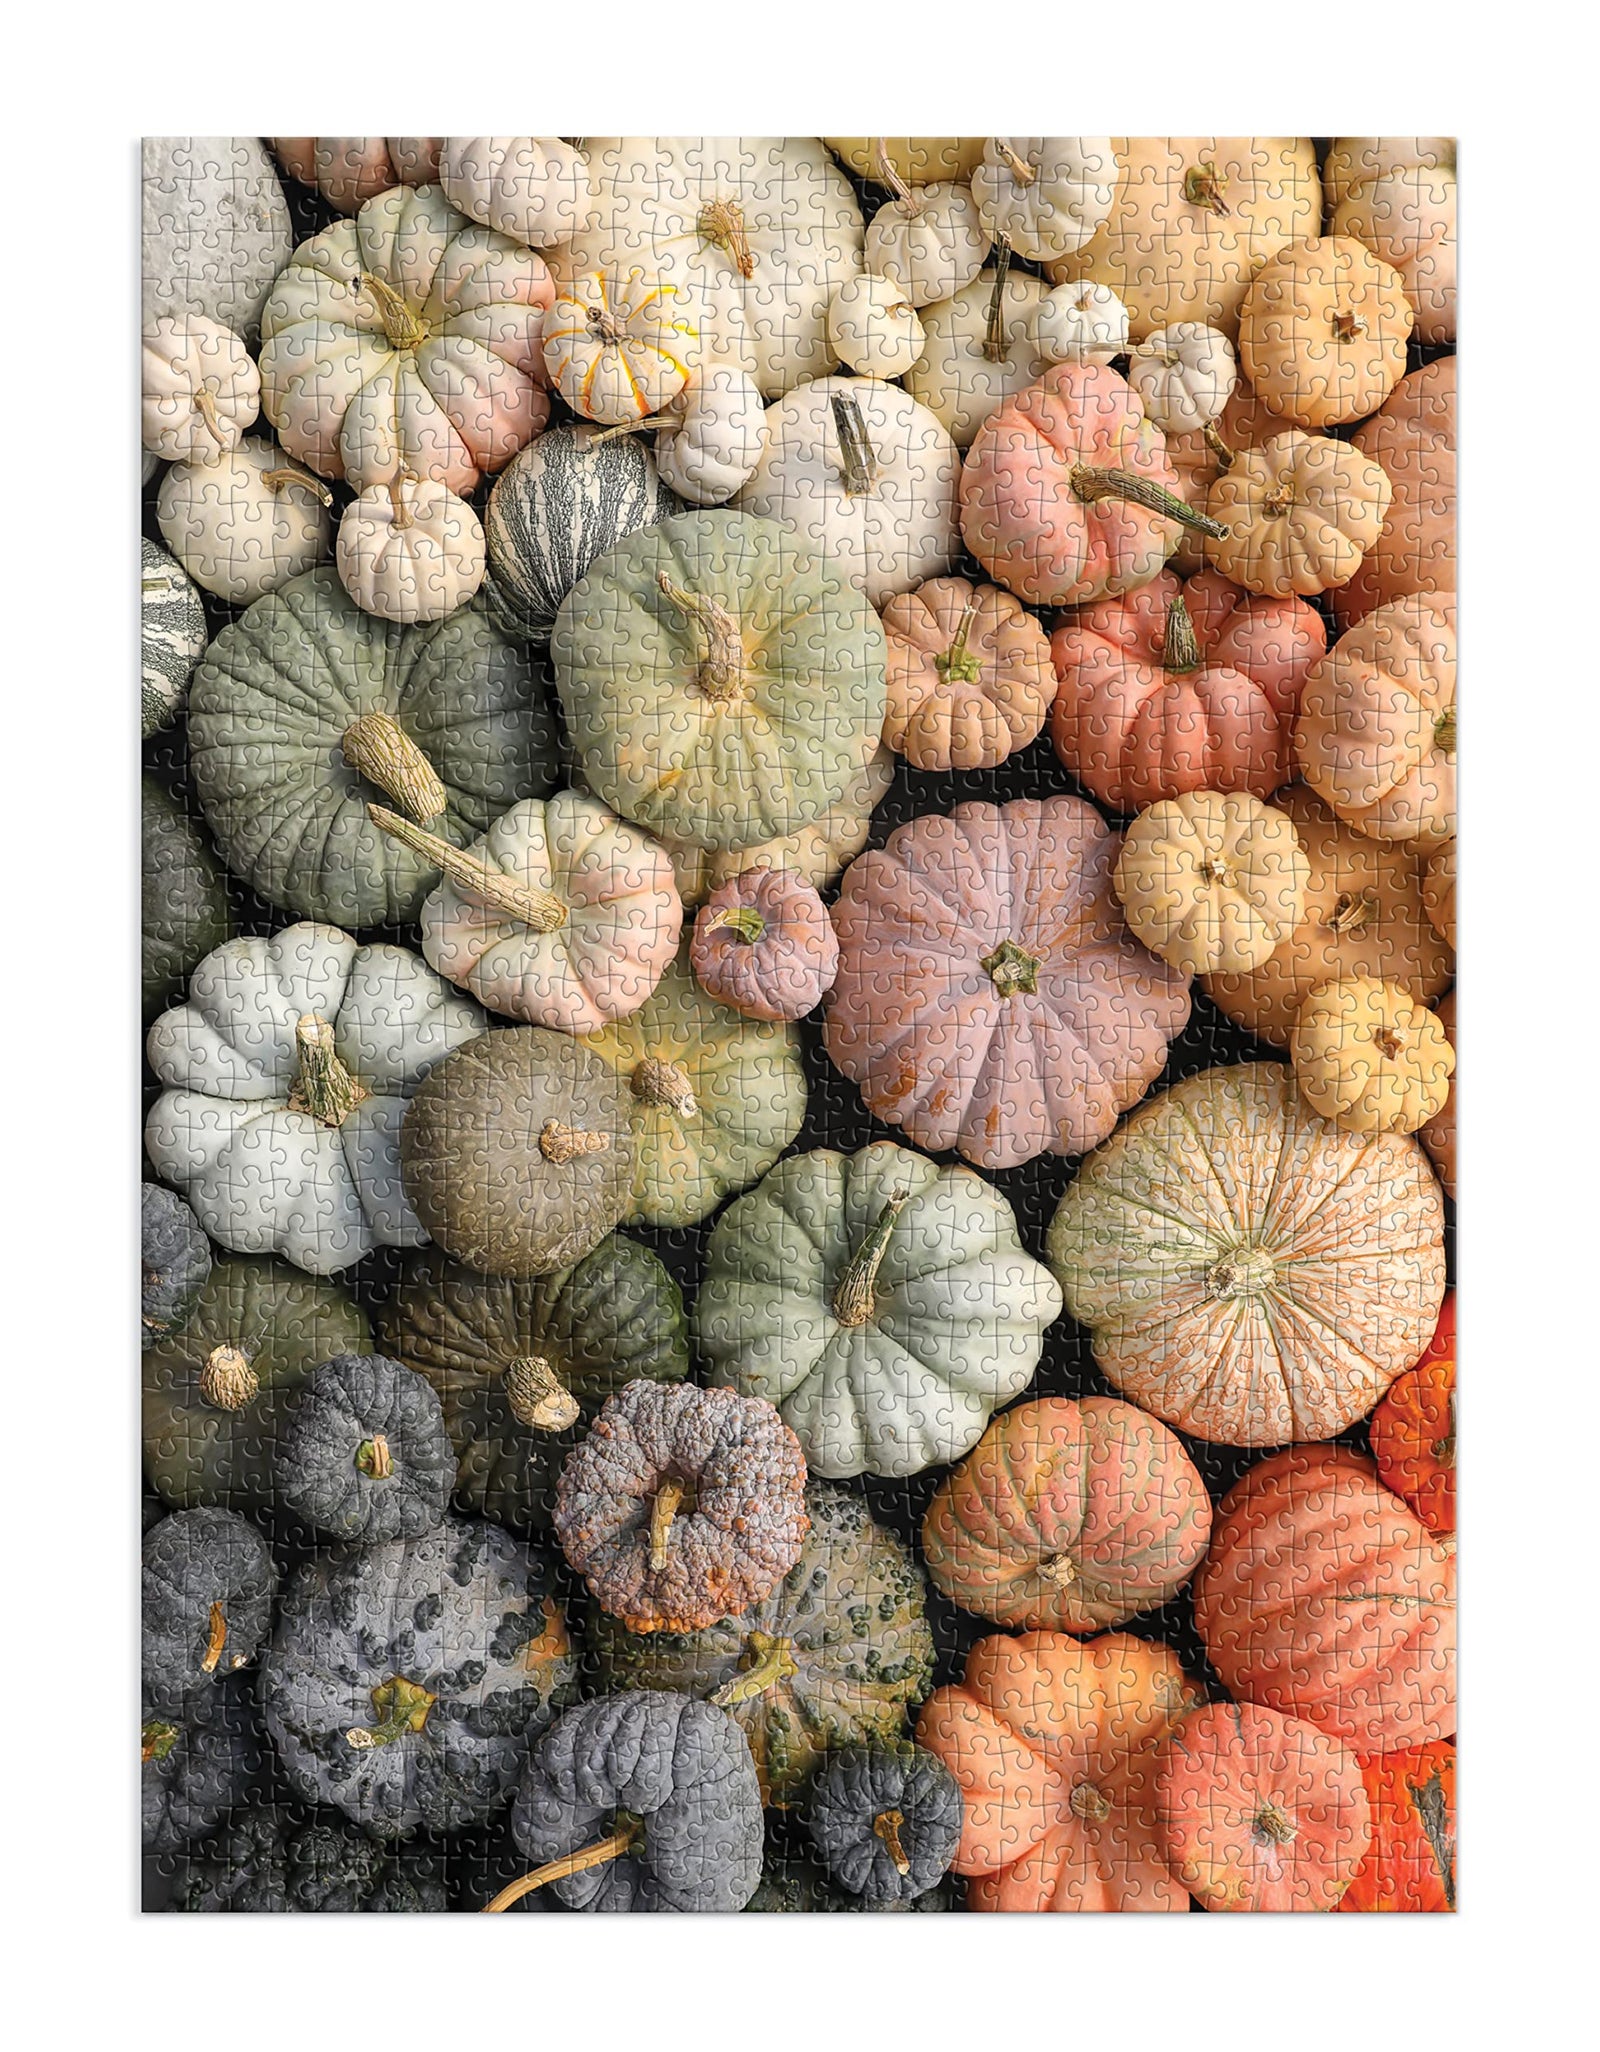 Galison Heirloom Pumpkins Puzzle, 1000 Pieces, 27” x 20” – Difficult Jigsaw Puzzle Featuring Stunning and Colorful Artwork – Thick, Sturdy Pieces, Challenging Family Activity